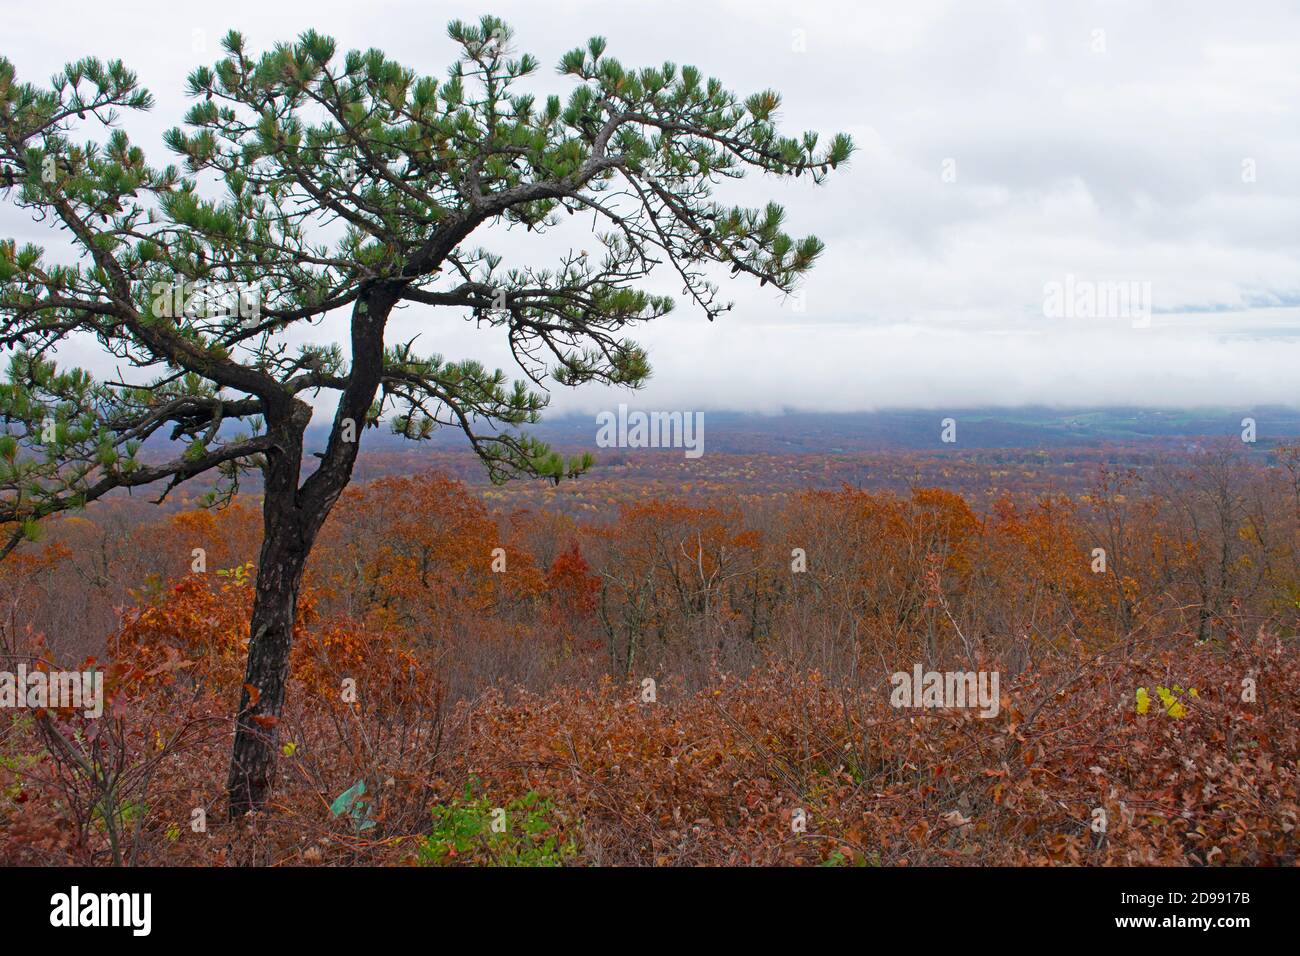 Cloudy skies and lush Autumn foliage at High Point Monument area of High Point State Park in New Jersey, USA -01 Stock Photo